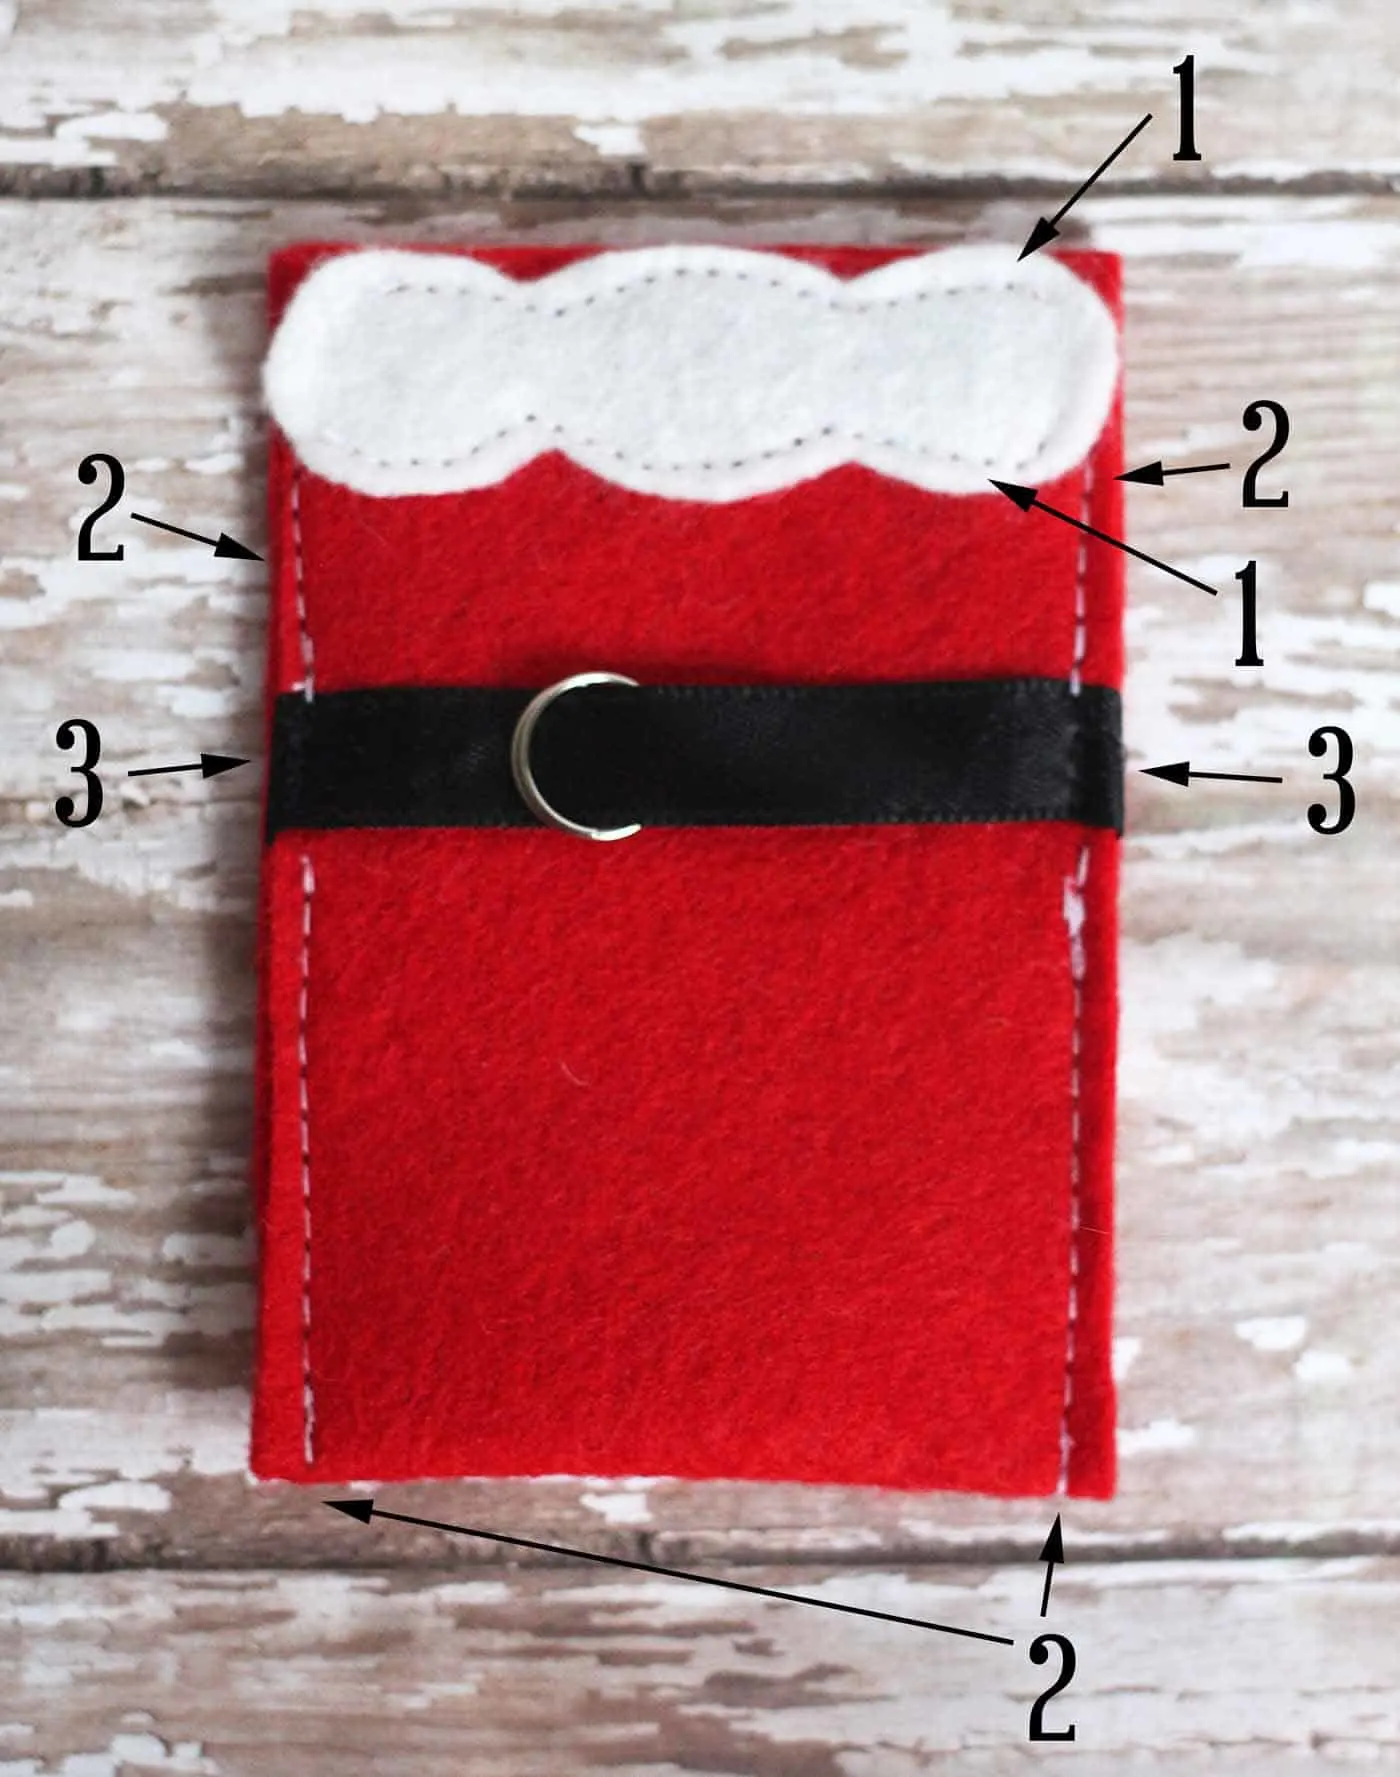 Diagram for sewing the Santa gift card holder